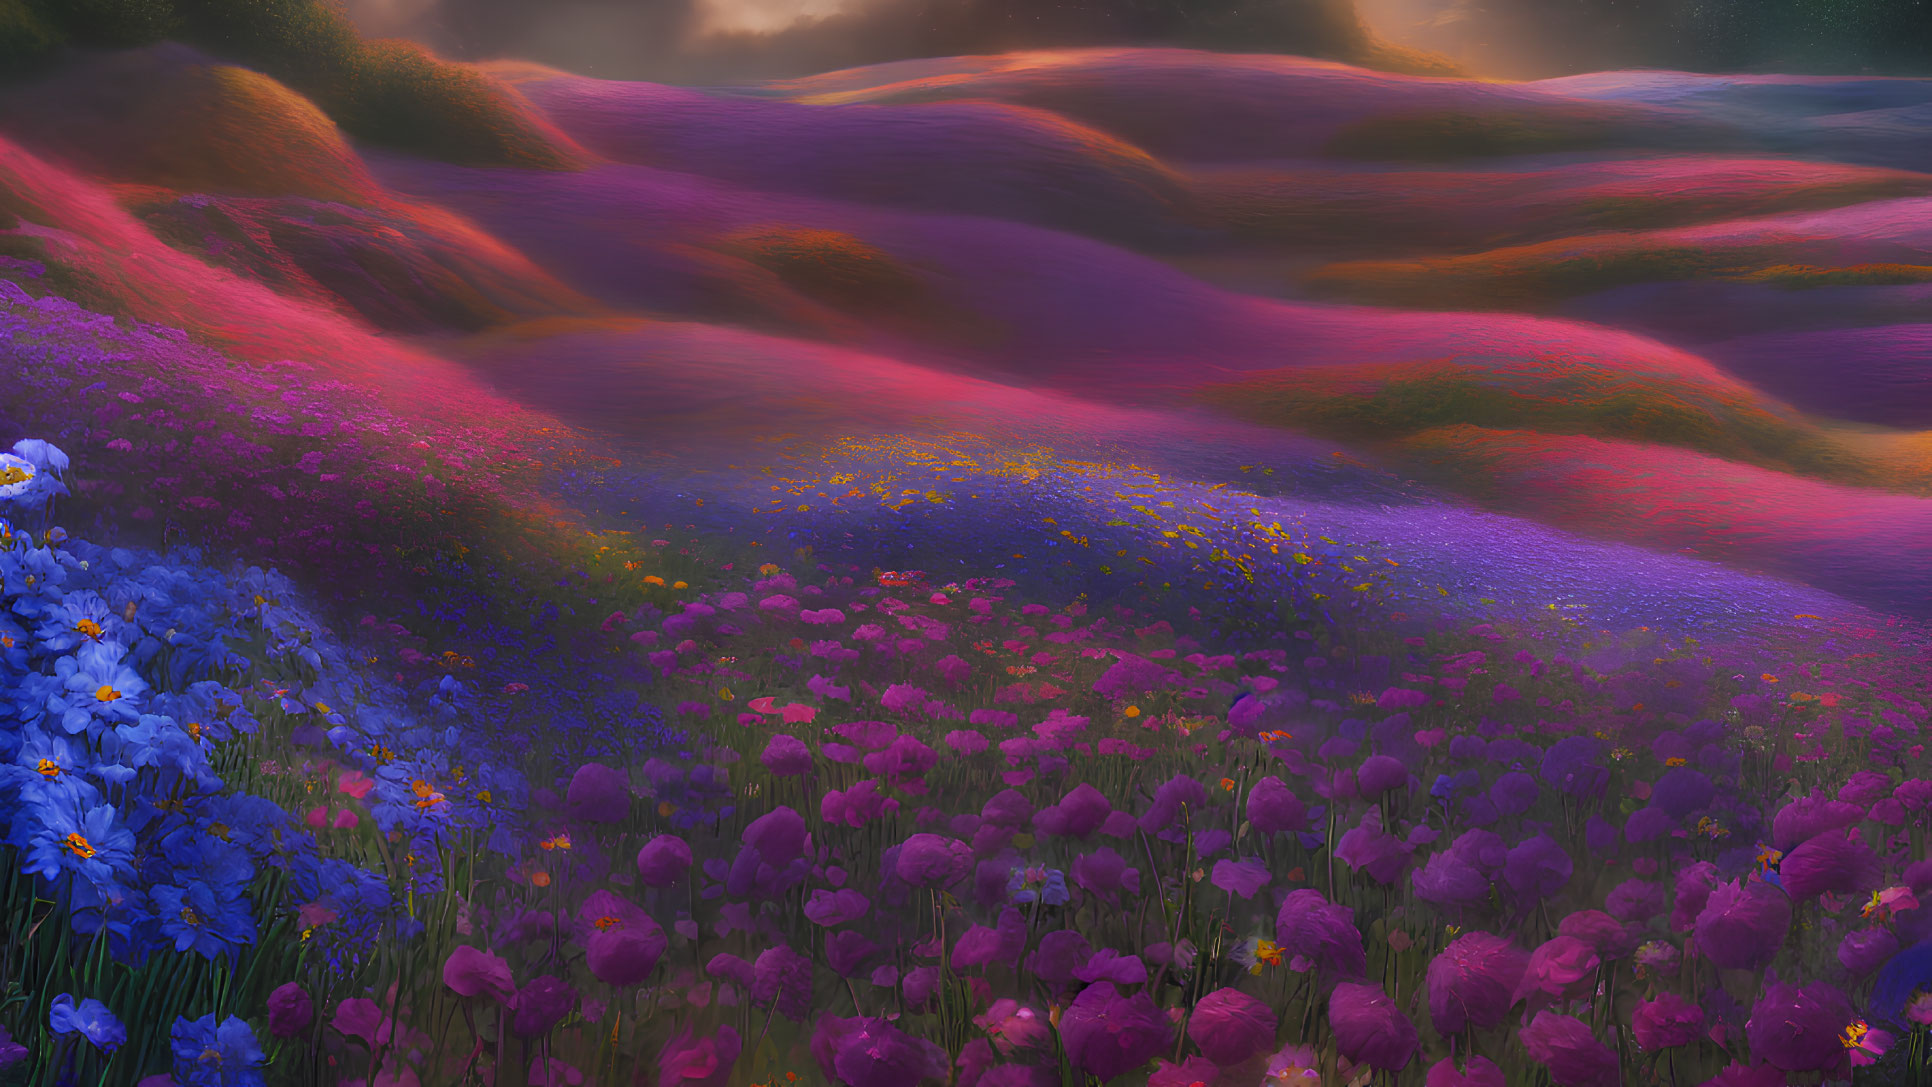 Colorful rolling hills with vibrant flowers under a warm glowing sky